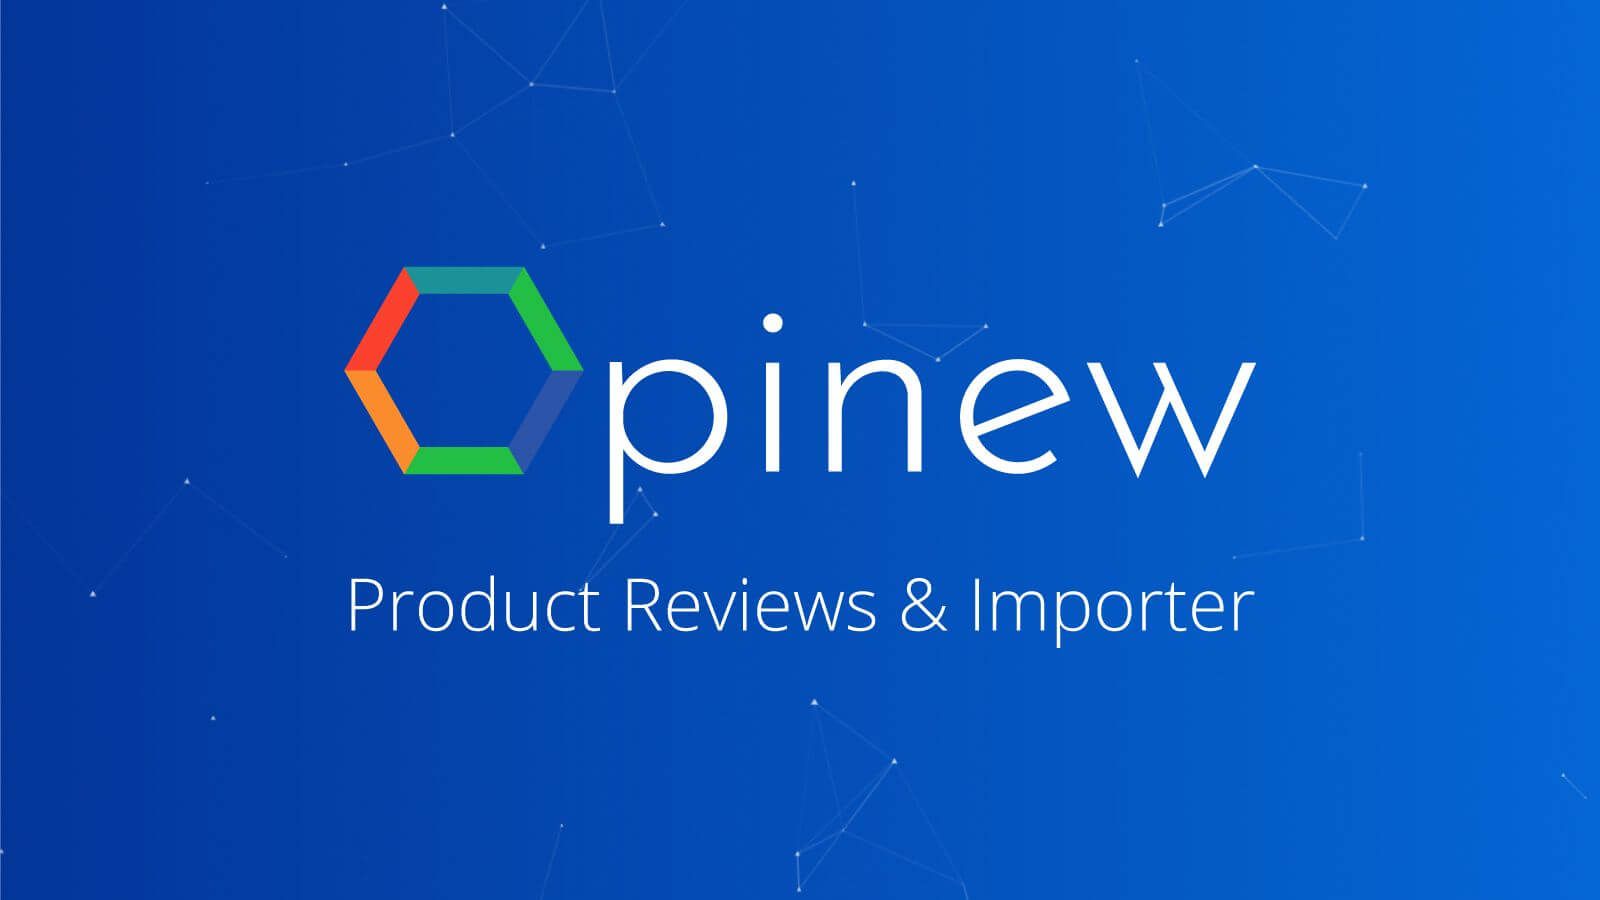 Opinew collects product reviews with option to add photos from customers. Import from Amazon, Aliexpress and Ebay, making it easy to get started.